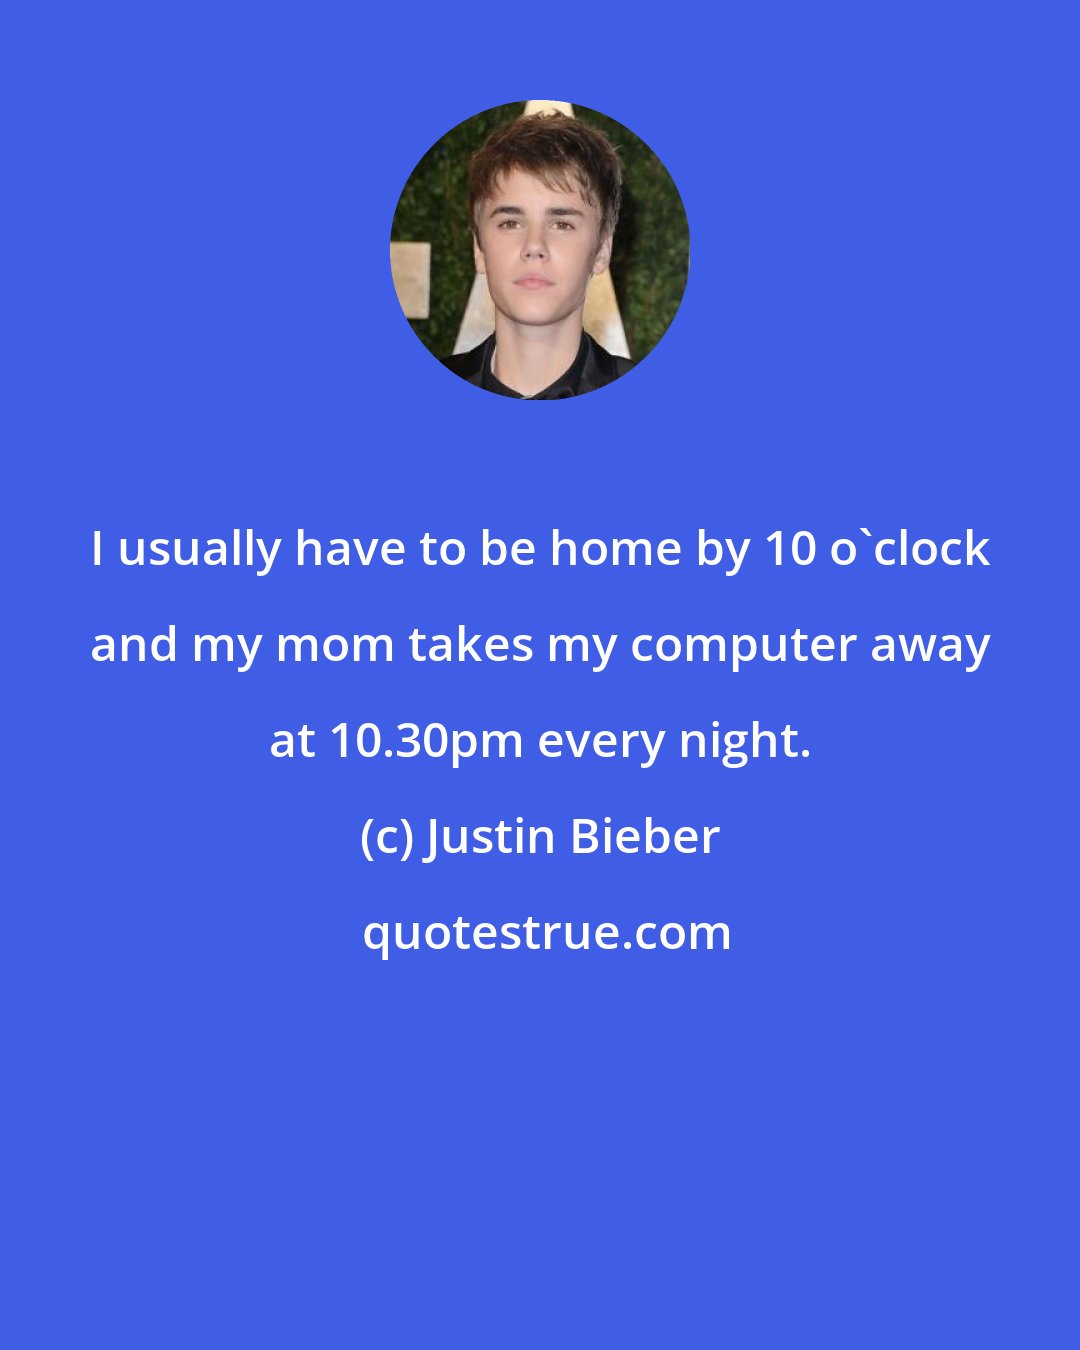 Justin Bieber: I usually have to be home by 10 o'clock and my mom takes my computer away at 10.30pm every night.